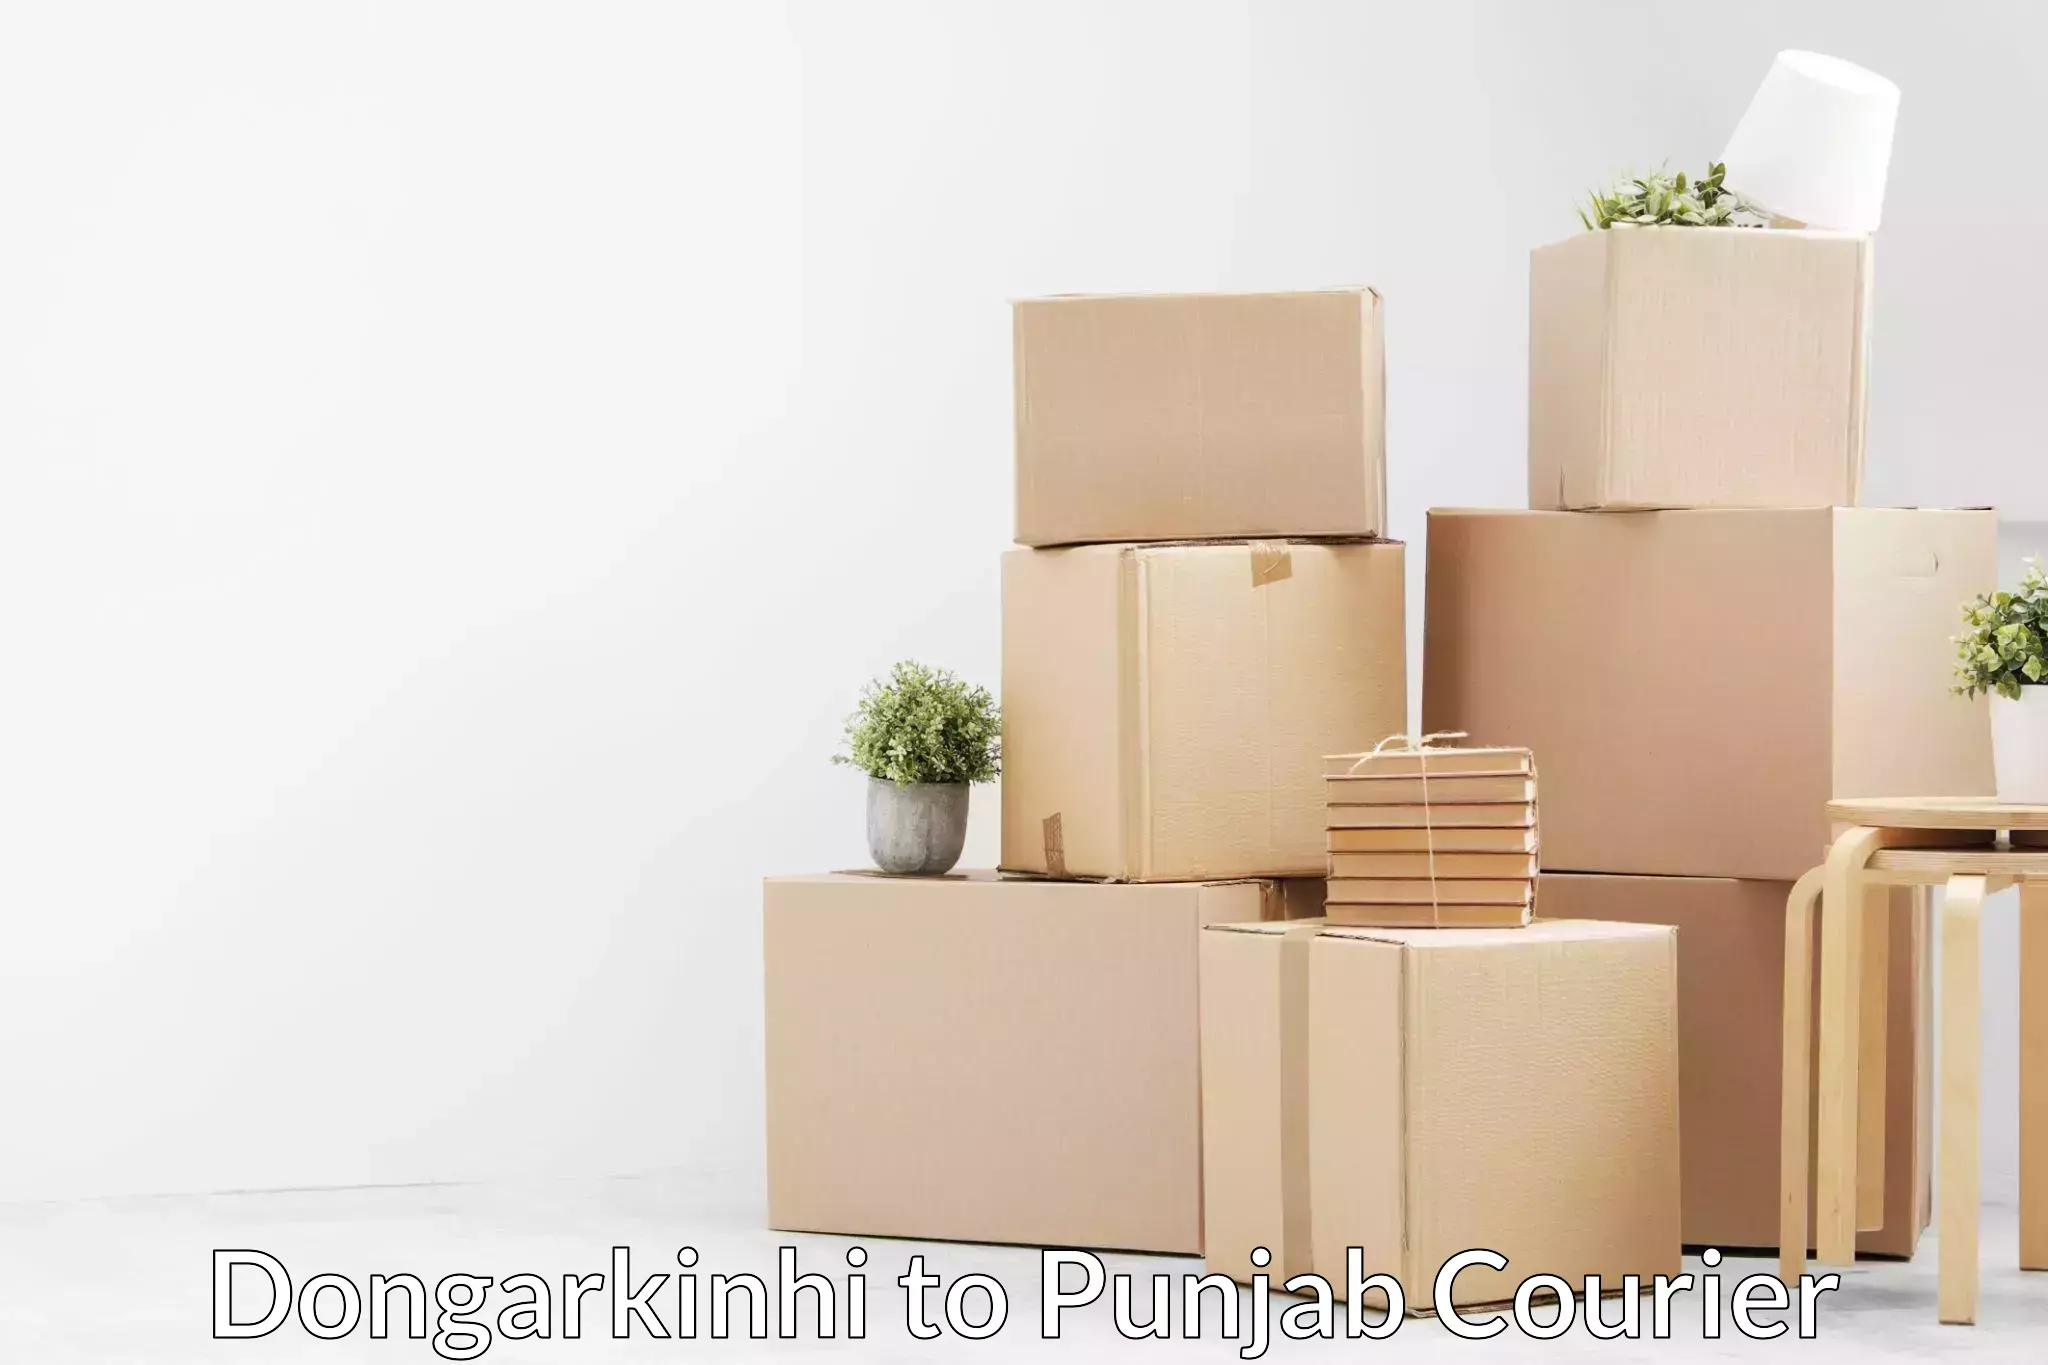 Quality furniture transport in Dongarkinhi to Ludhiana